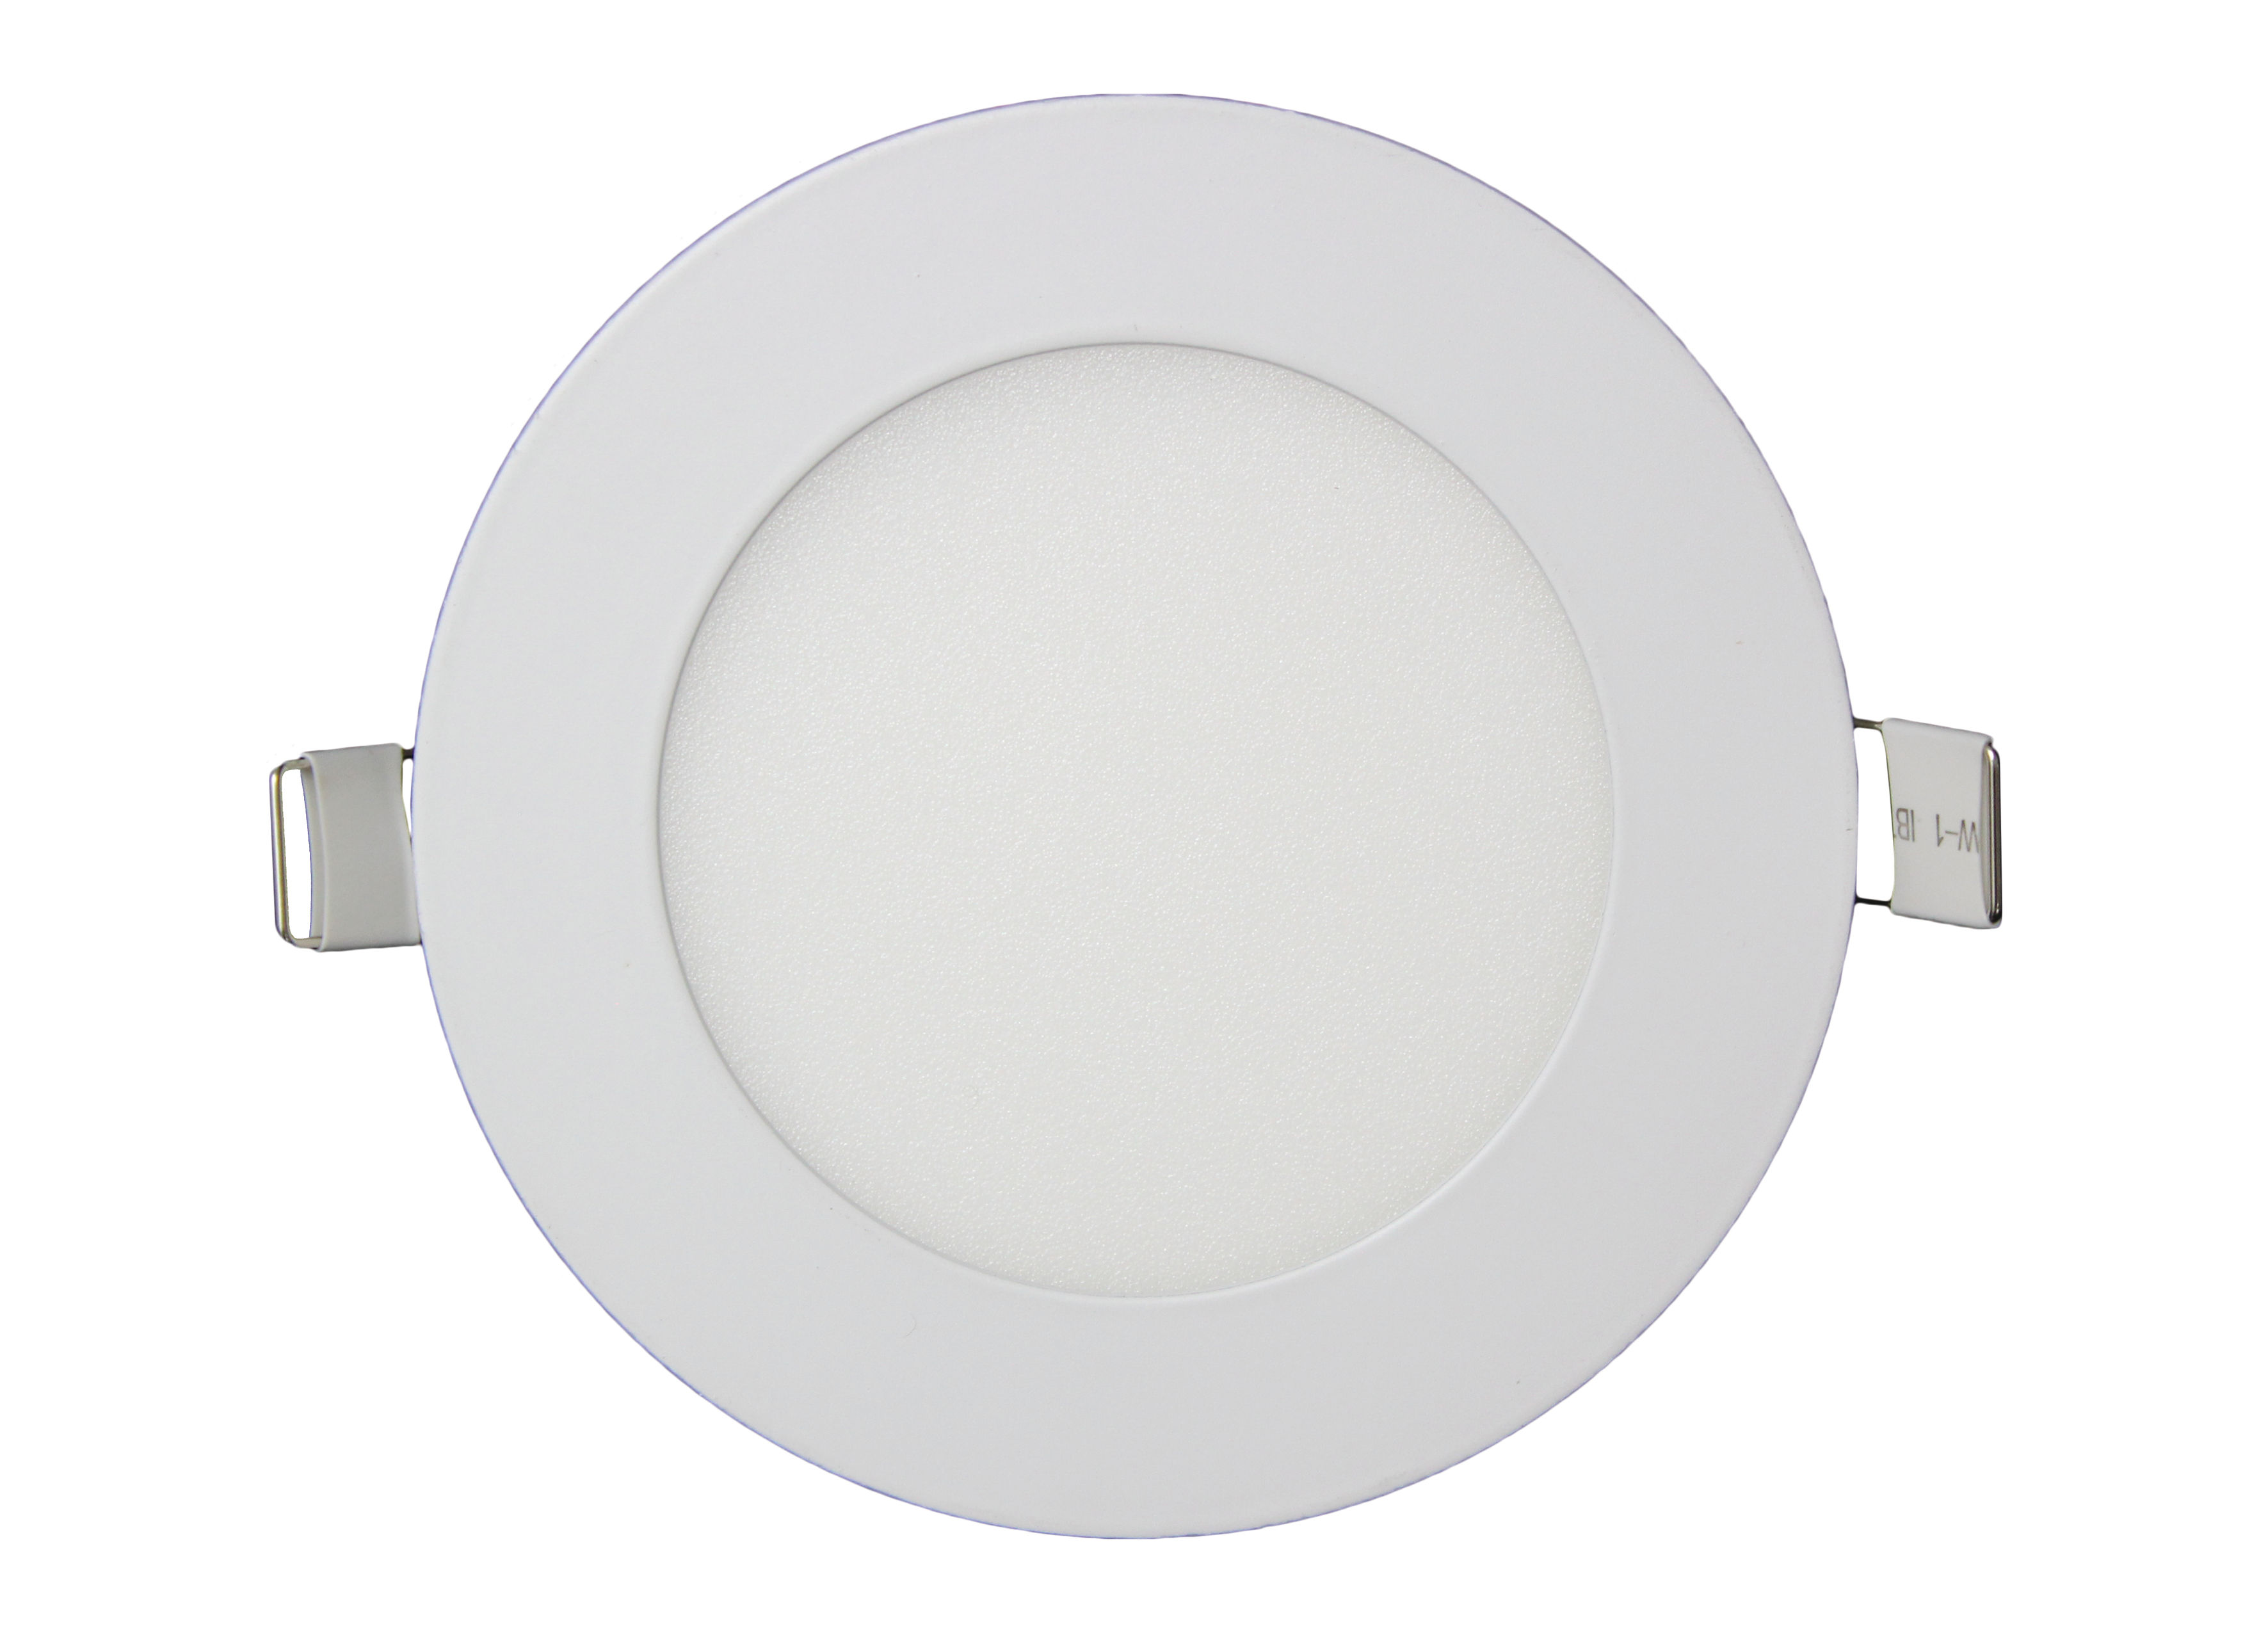 21W Non-Dimmable LED Warm White Panel Light (D2W-21W) - VETi